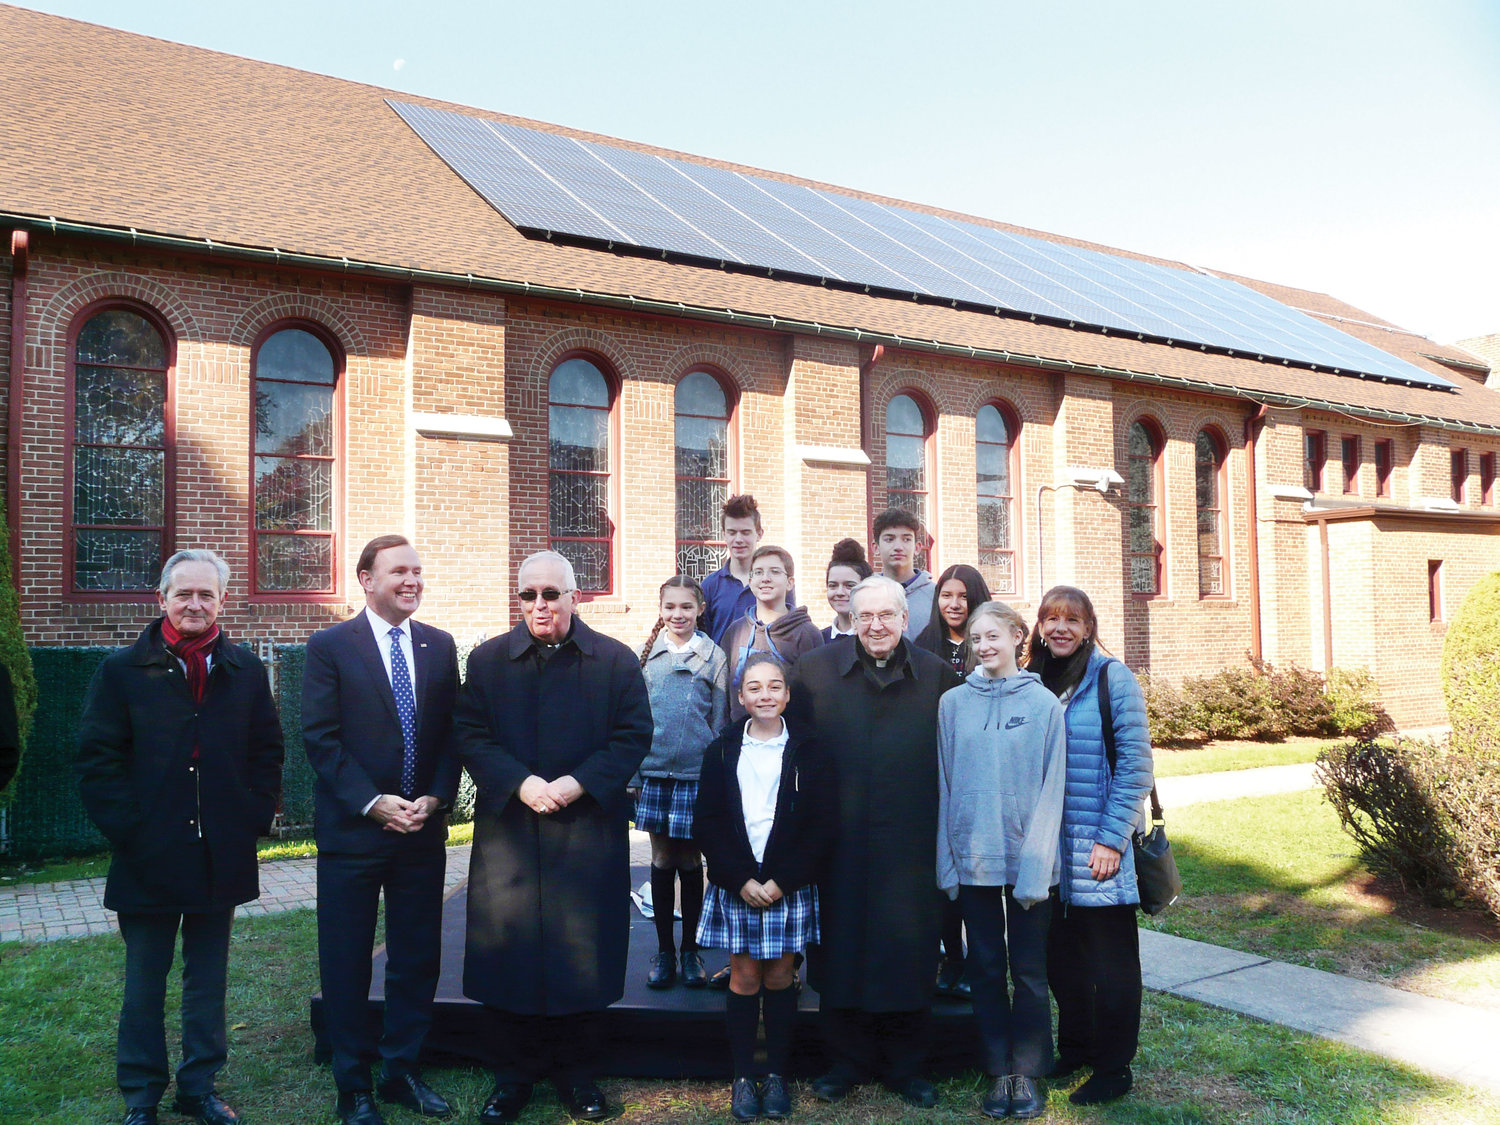 Joining Auxiliary Bishop John O’Hara, third from left, and Msgr. Peter Finn, administrator of Blessed Sacrament parish, along with eighth-graders from Blessed Sacrament School, were Martin Susz, director of energy management for the archdiocese, far left, and New York State Assembly member Michael Cusick.